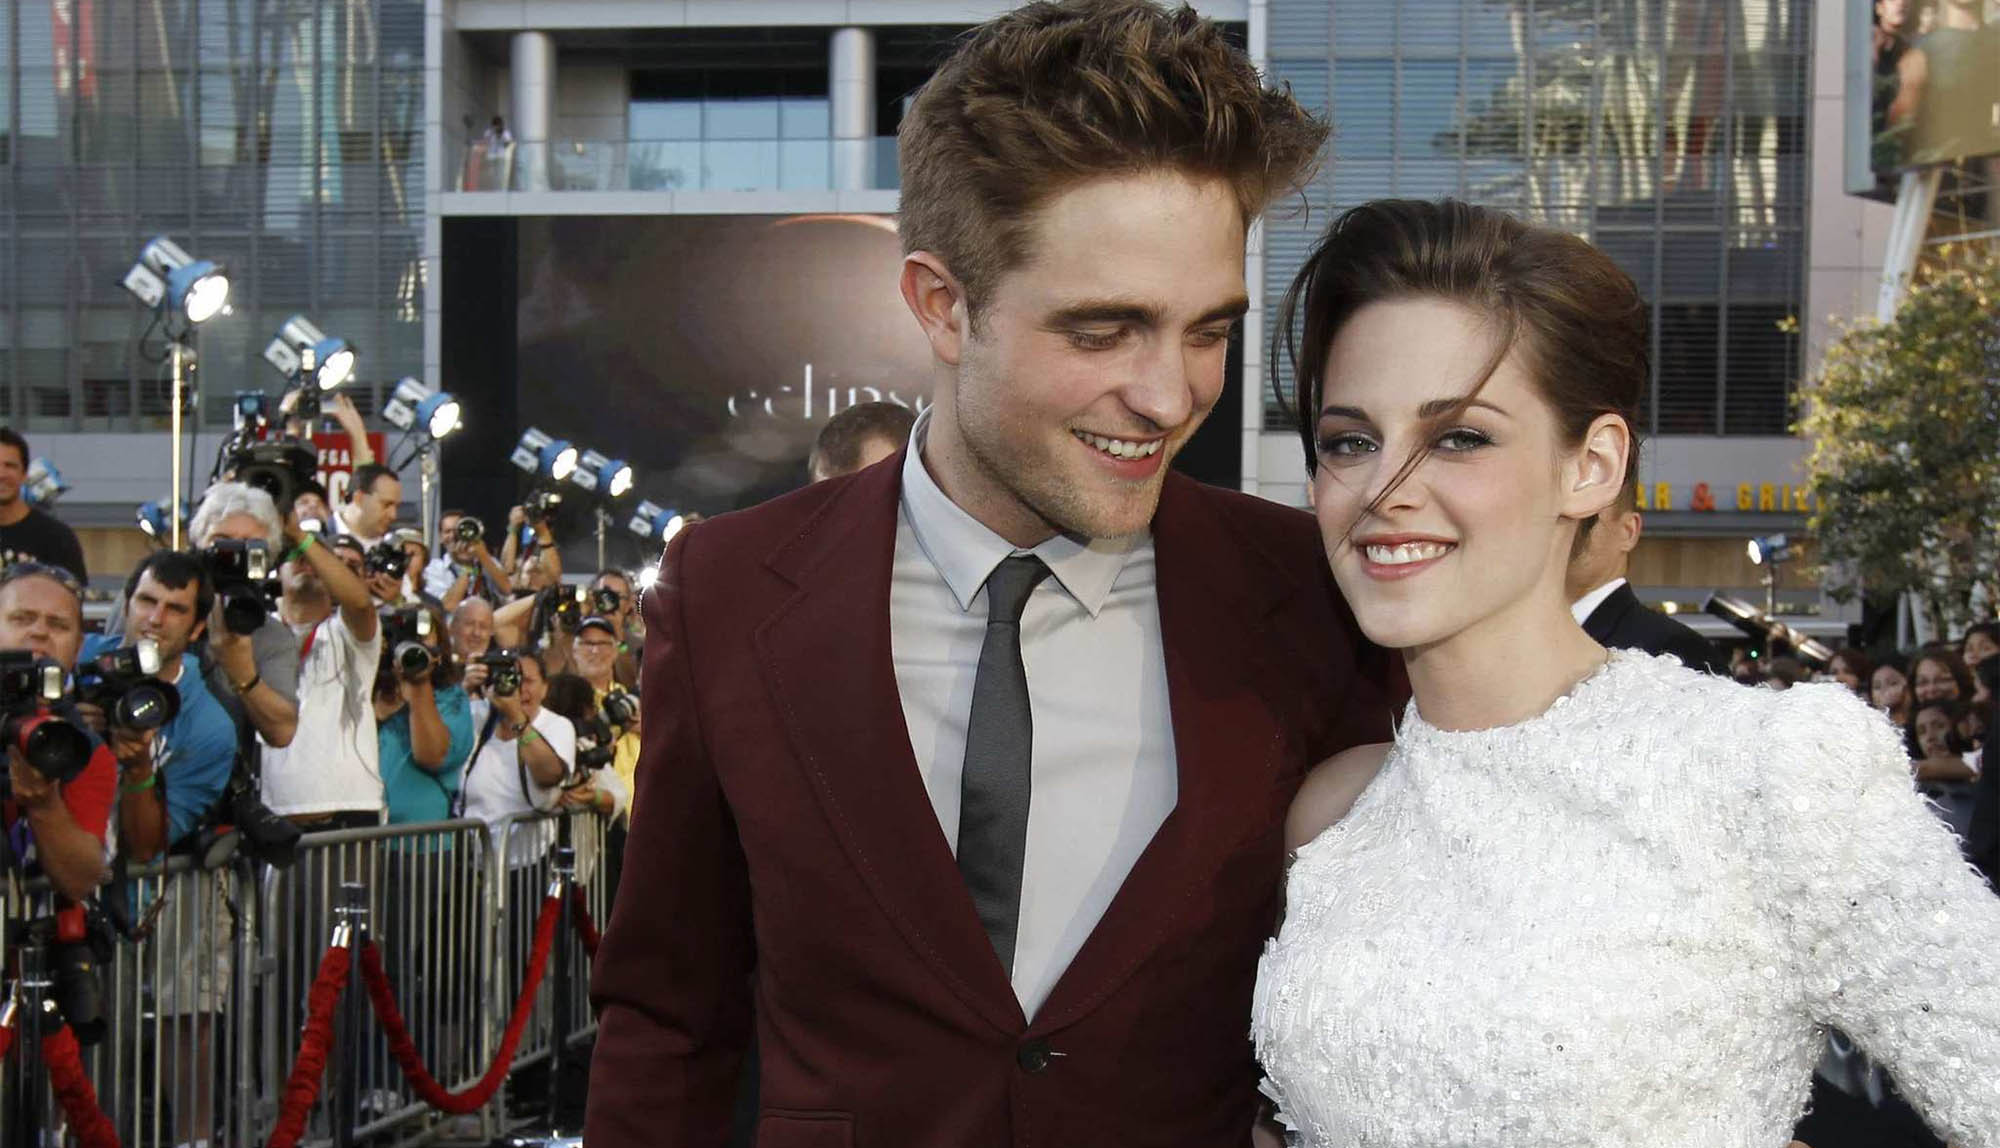 Robert Pattinson’s a certified chameleon on screen so he’s definitely up to the task: here are all the K-Stew movies R-Patz would have ruled in.